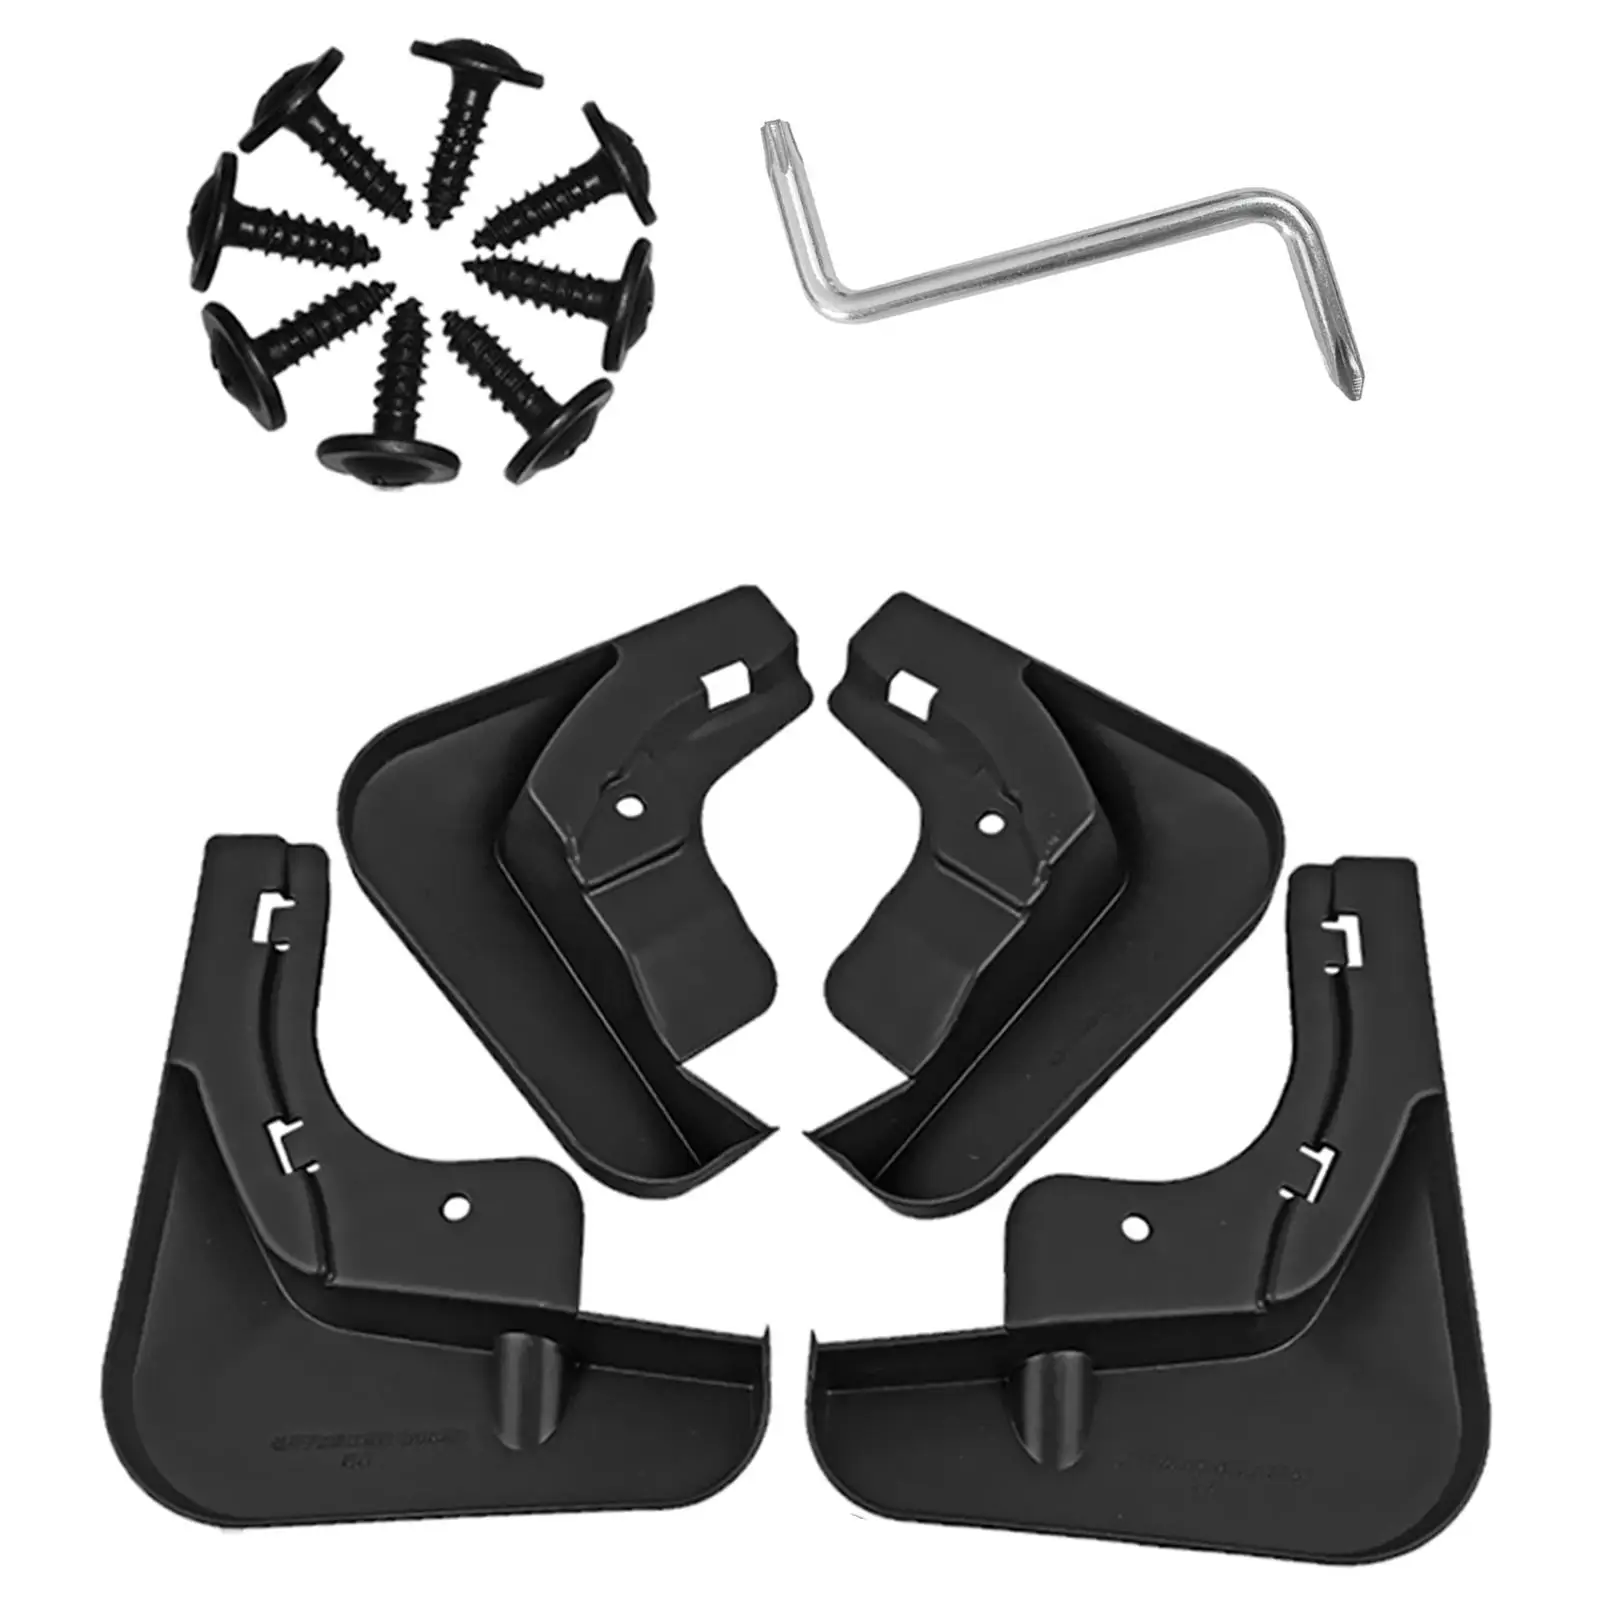 Splash Guards Fender Accessories Mudguards for Yuan Plus Professional Directly